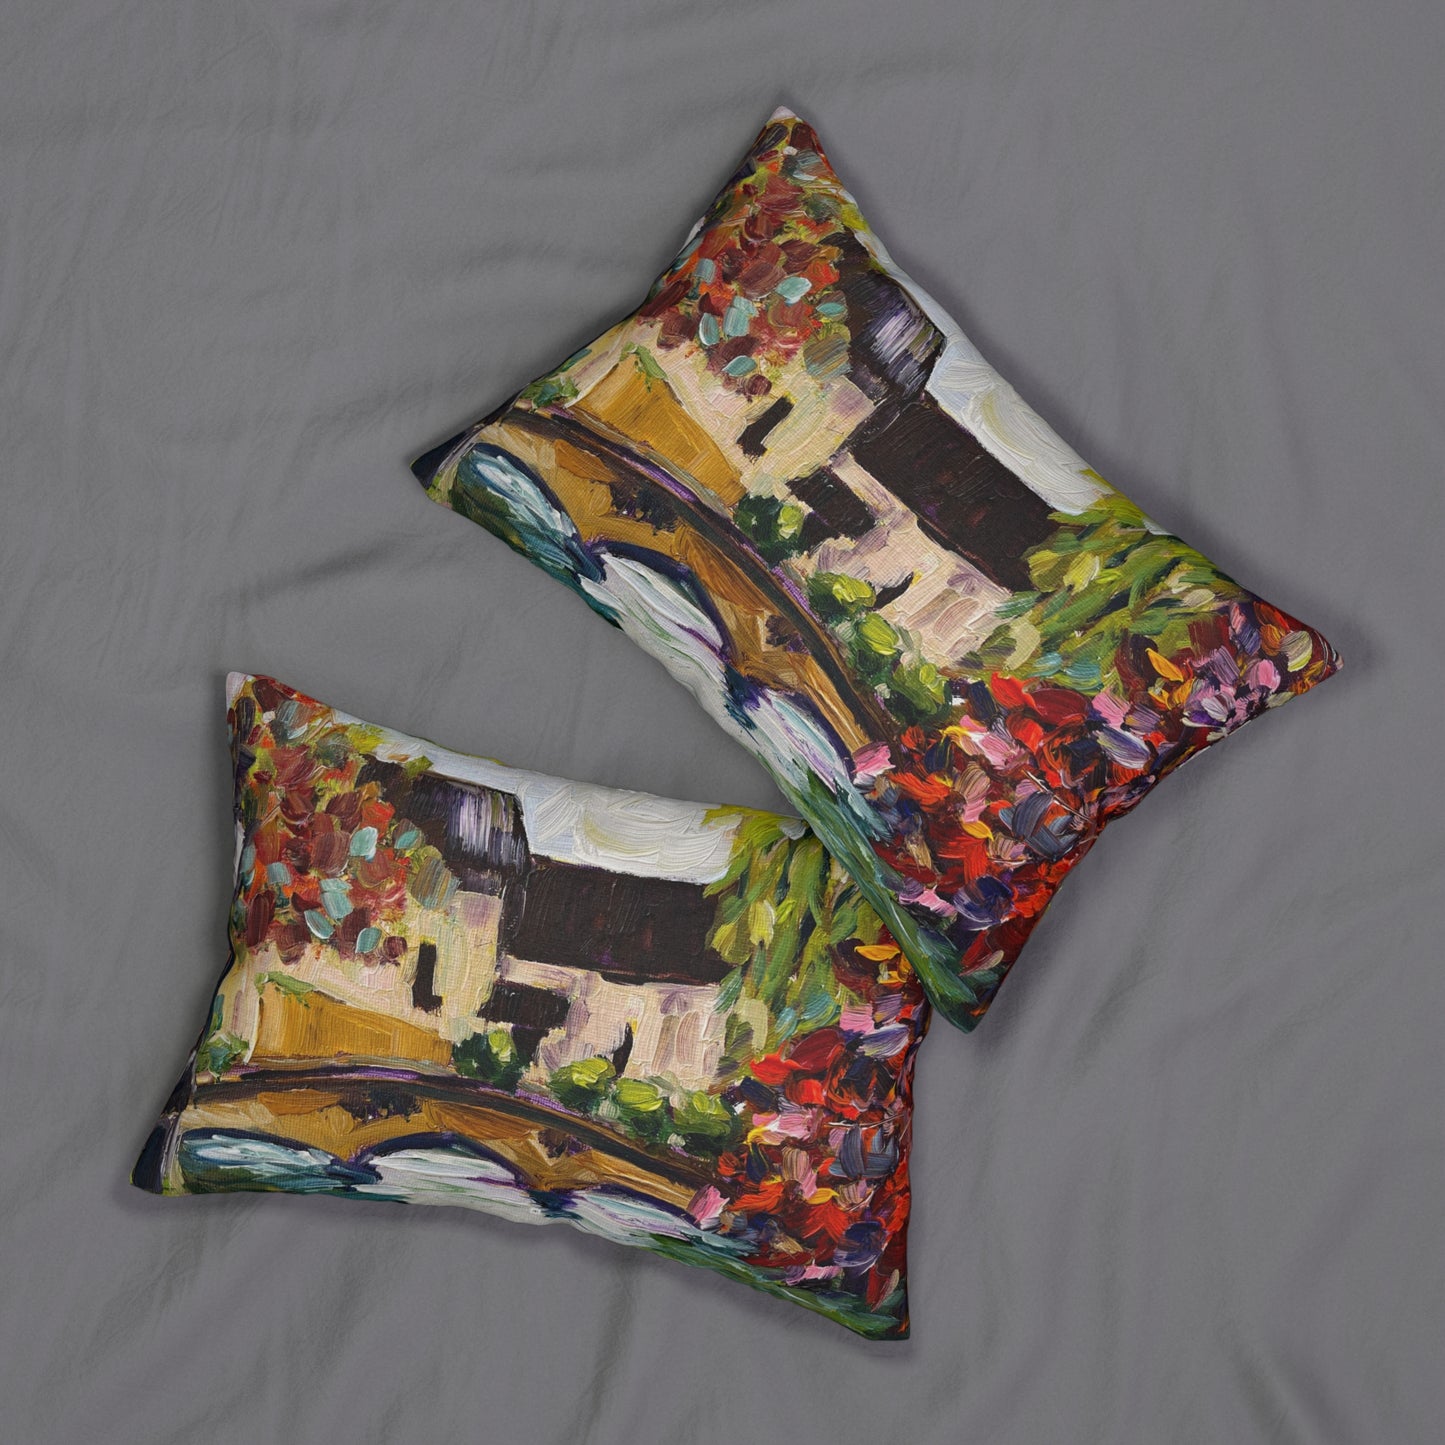 Autumn in Bourton on the Water Cotswolds Lumbar Pillow